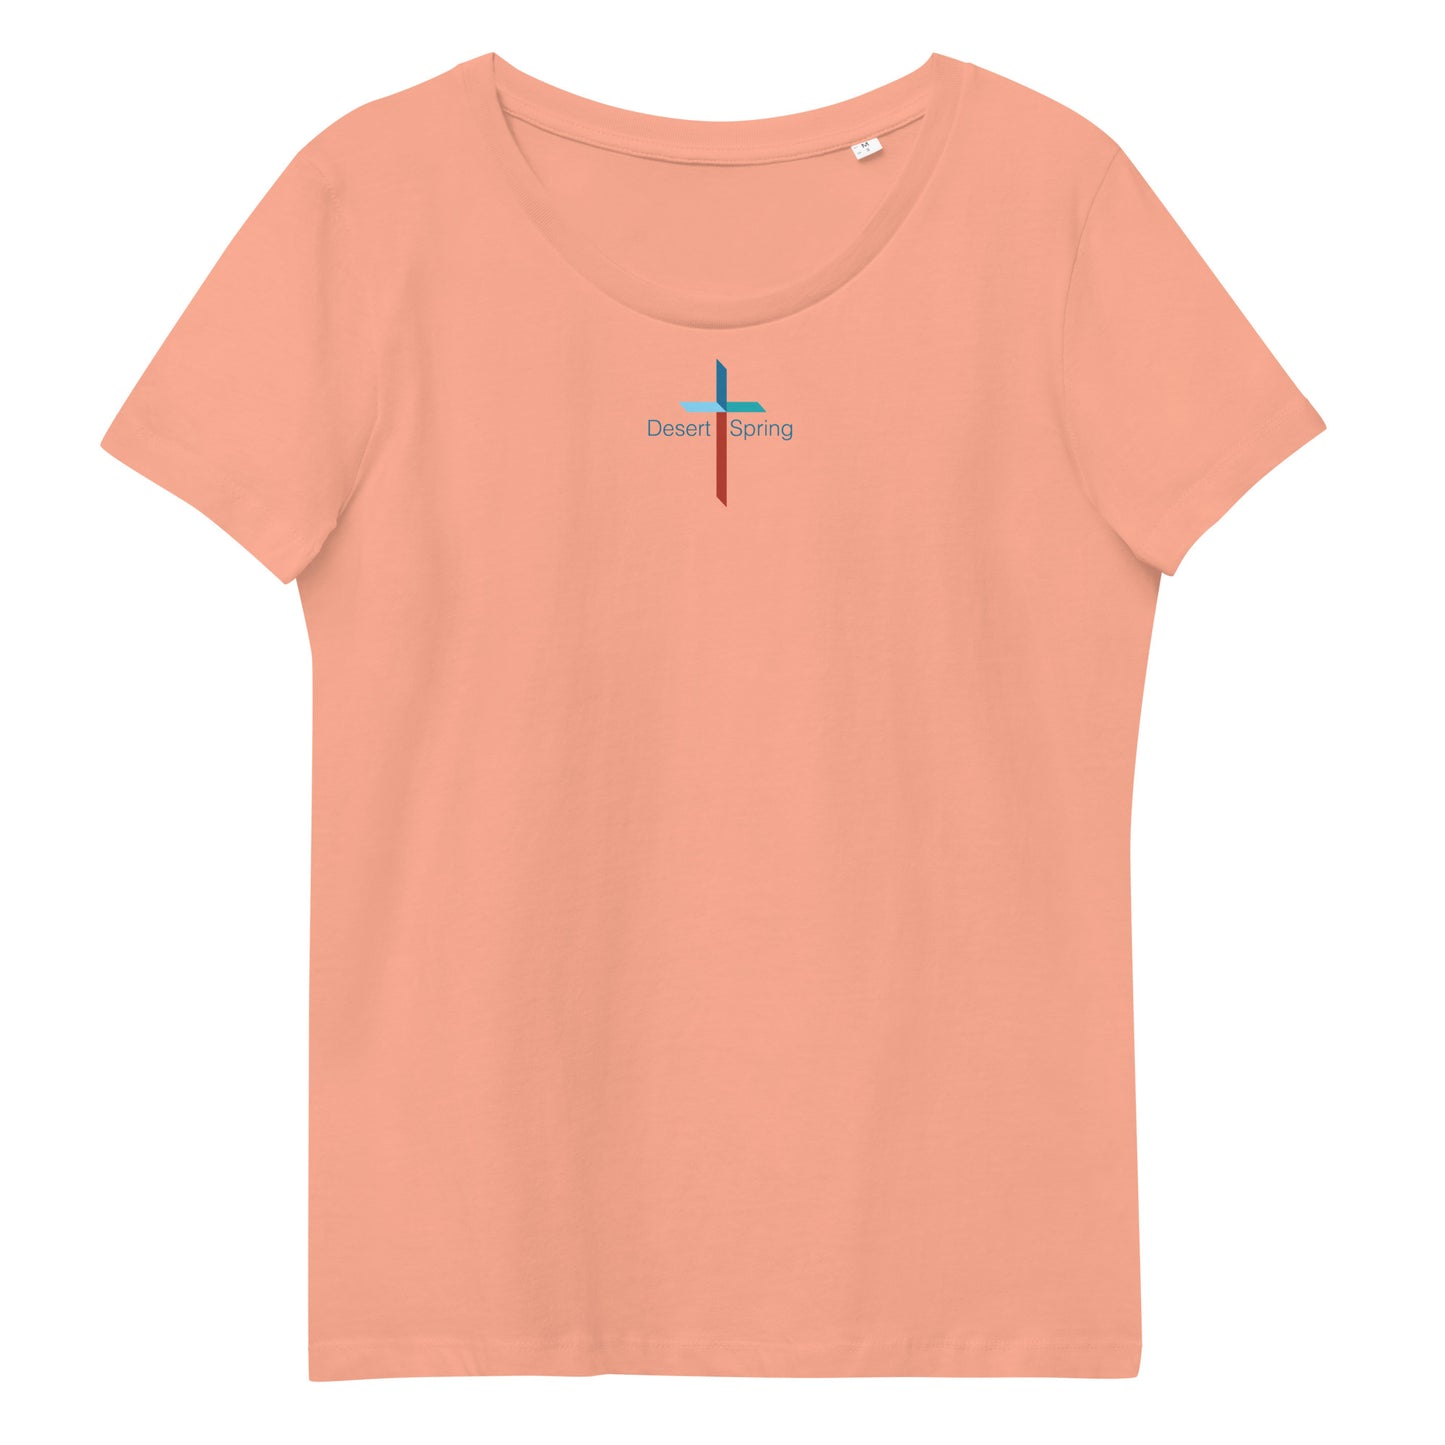 Women's "Meredith" Cross fitted eco tee